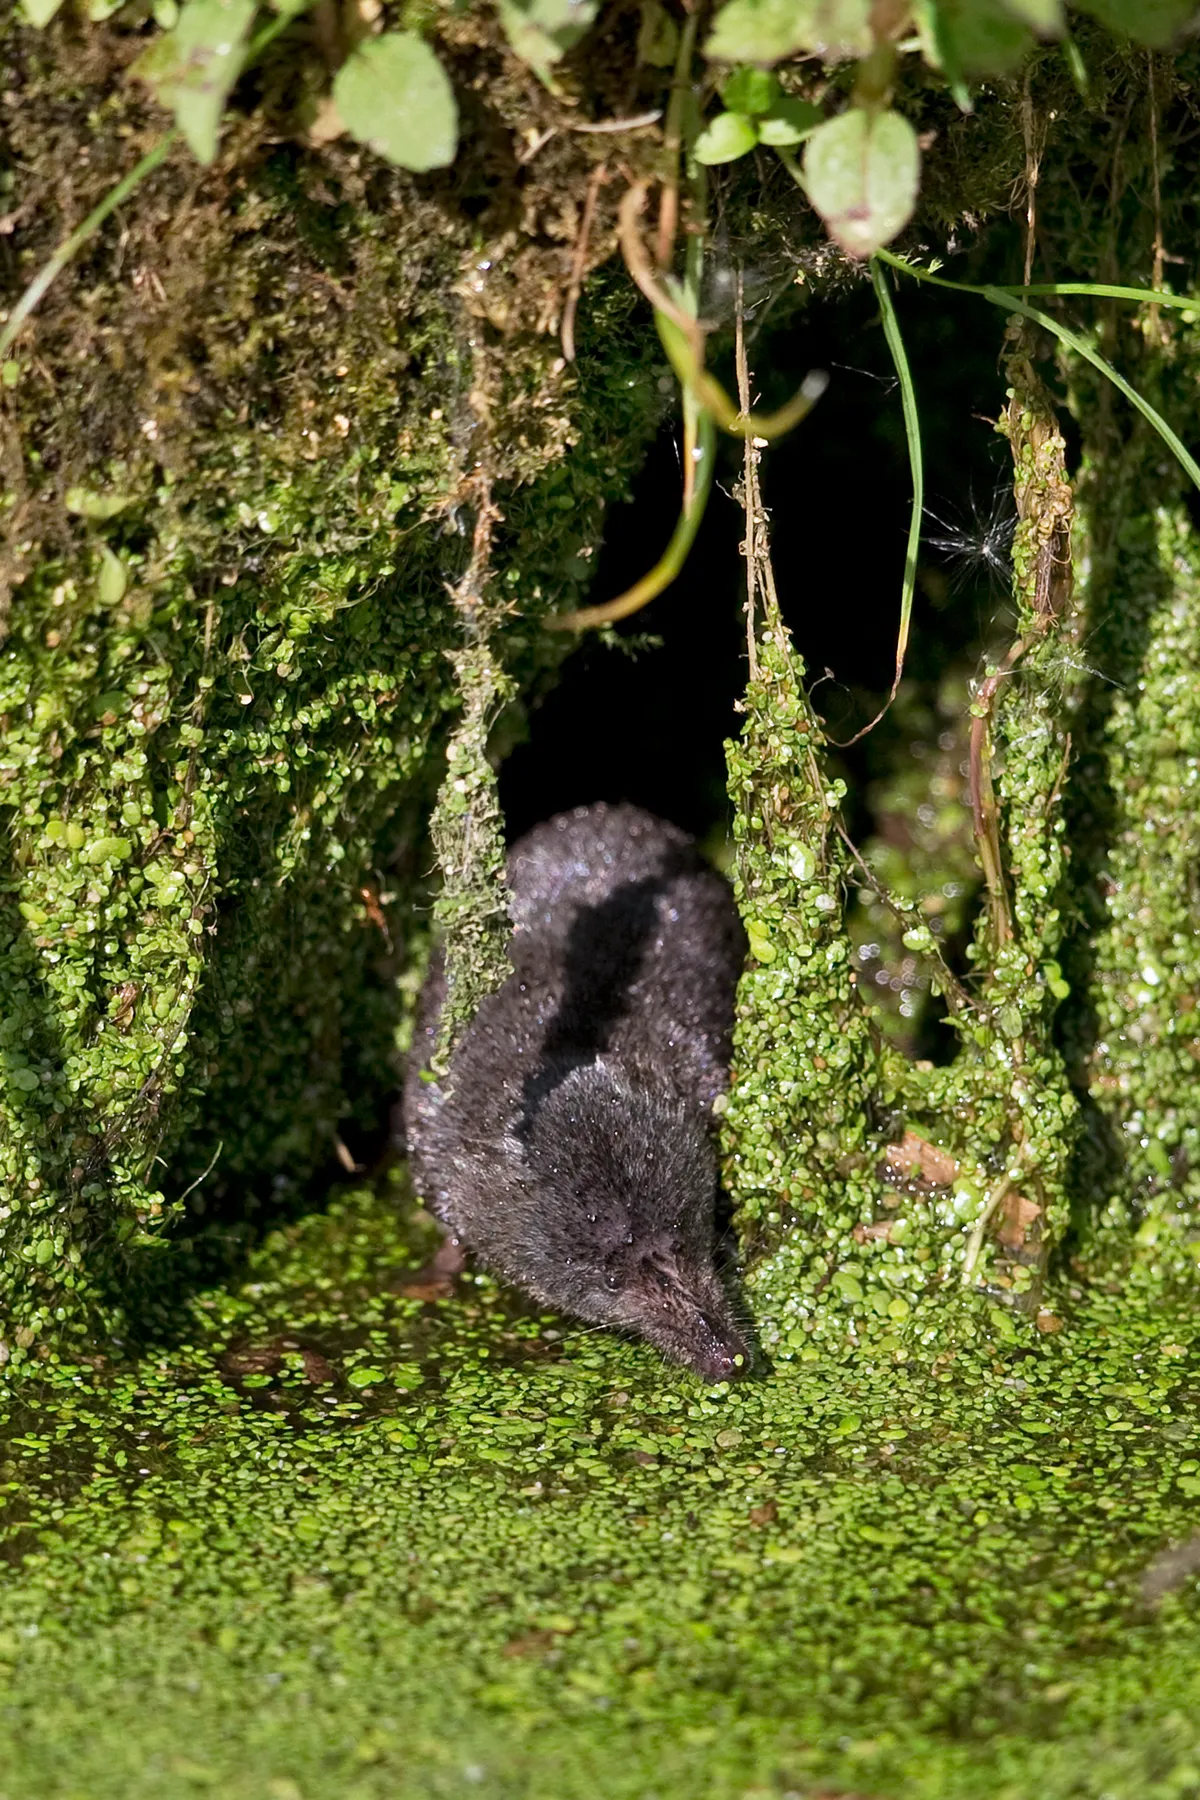 A dark coloured shrew entering water, surrounded by algae.